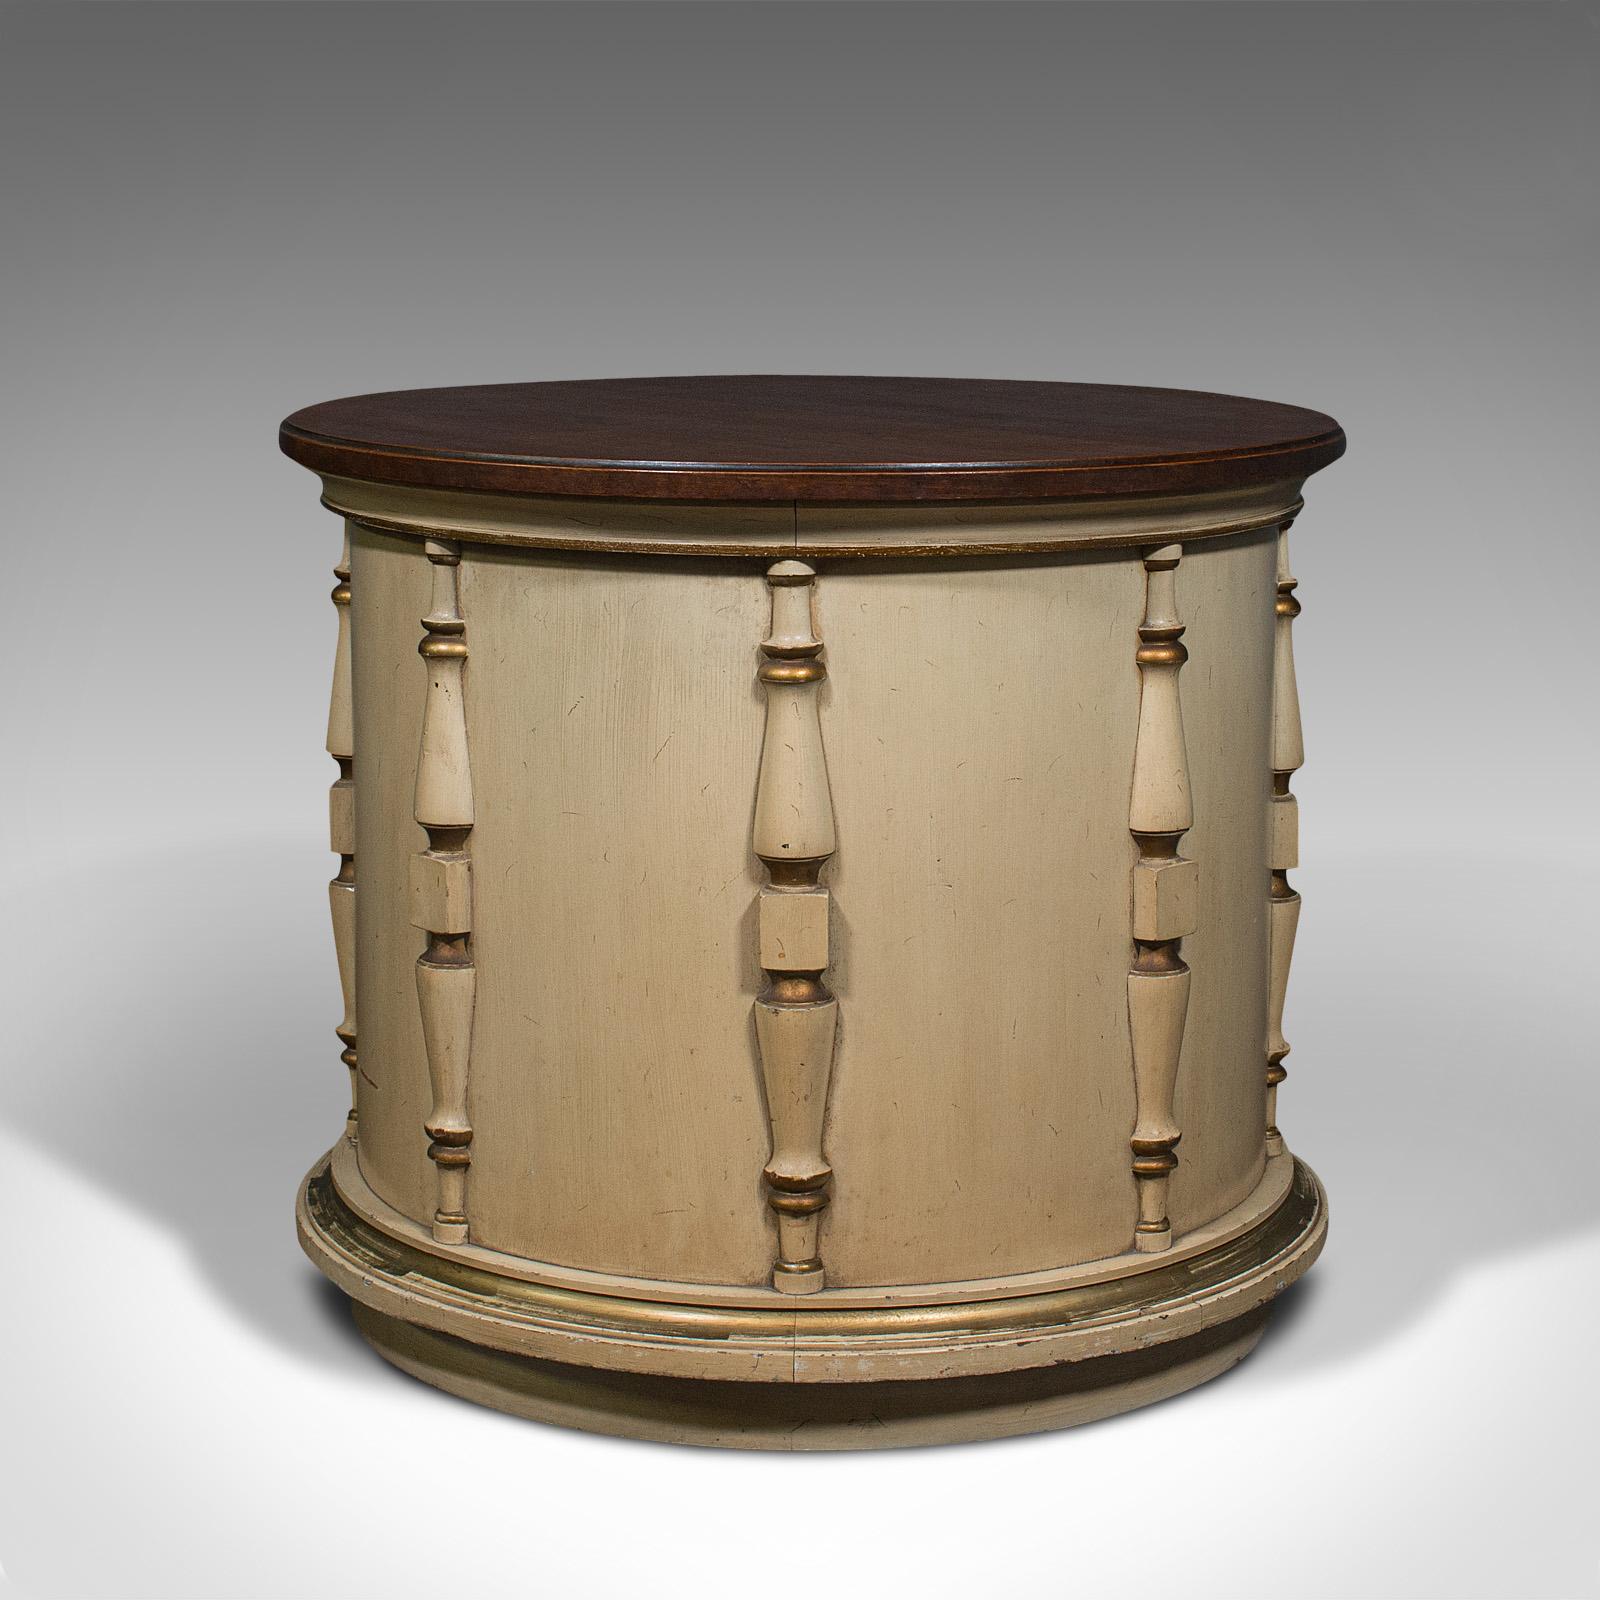 Pine Vintage Drum Table, English, Occasional, Coffee, Cabinet, Late 20th Century